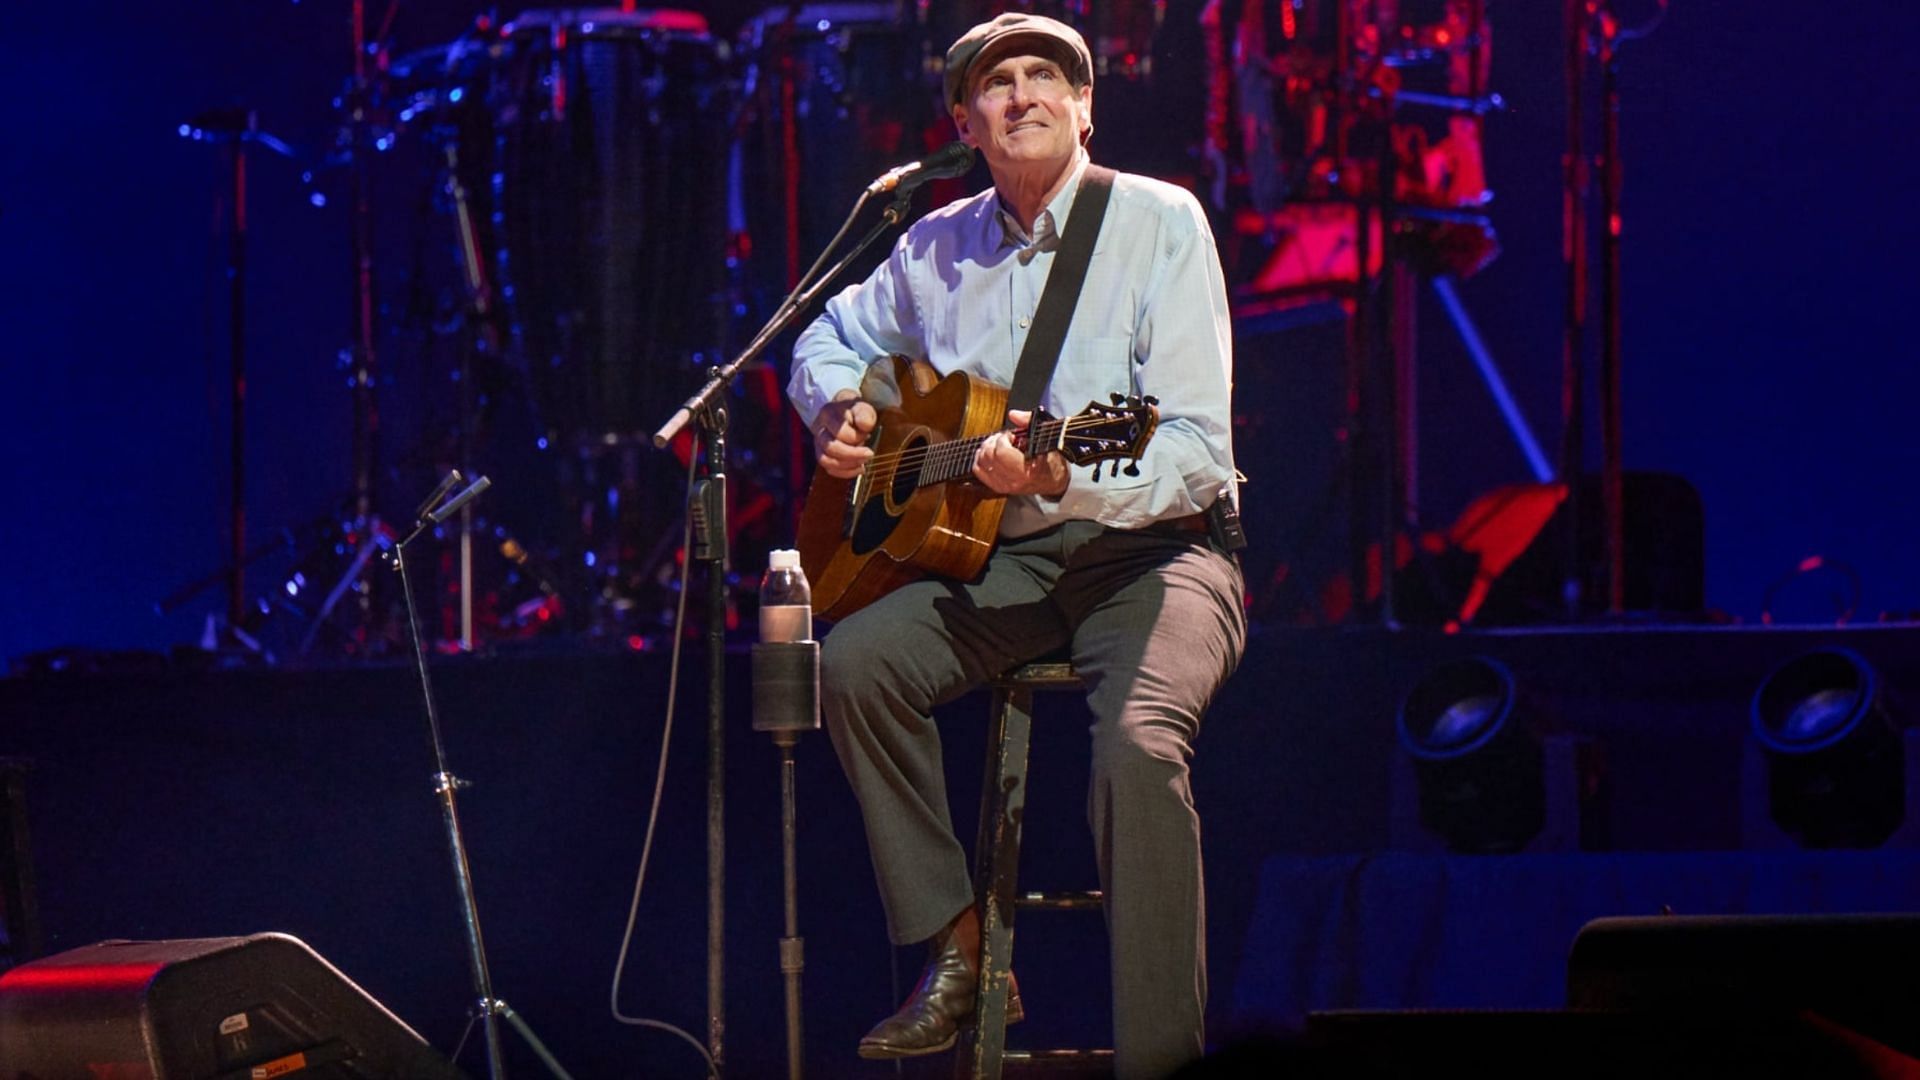 James Taylor is set to hit the road starting this April and has released the tour dates for Canada, US and Europe tours. (Image via Facebook / James Taylor)